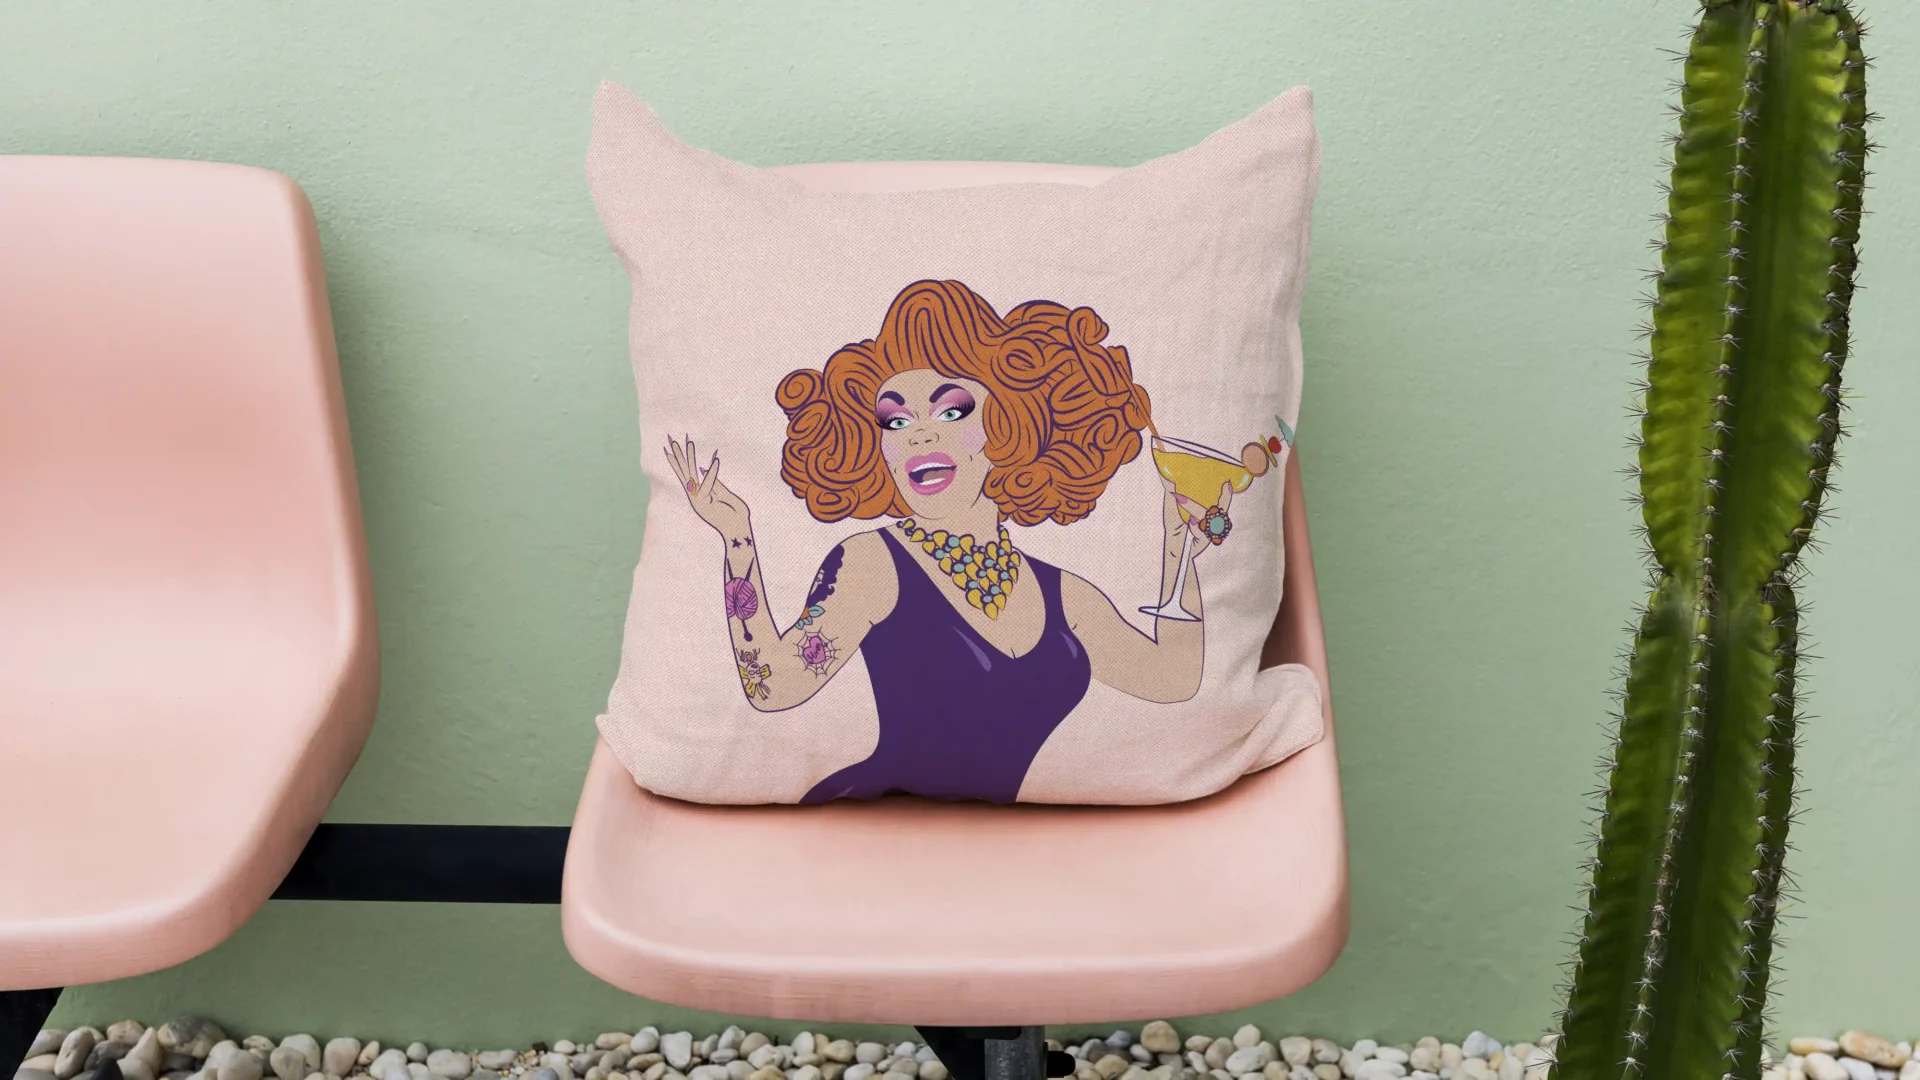 vibrant original festival branding featuring custom illustrations of performer in drag wearing fabulous oversized orange wig and classic lbd, in a stunning shade of purple, holding a summery cocktail and smiling widely. printed on a custom cushion cover sitting on a pink bench seat in a palm springs desert setting.